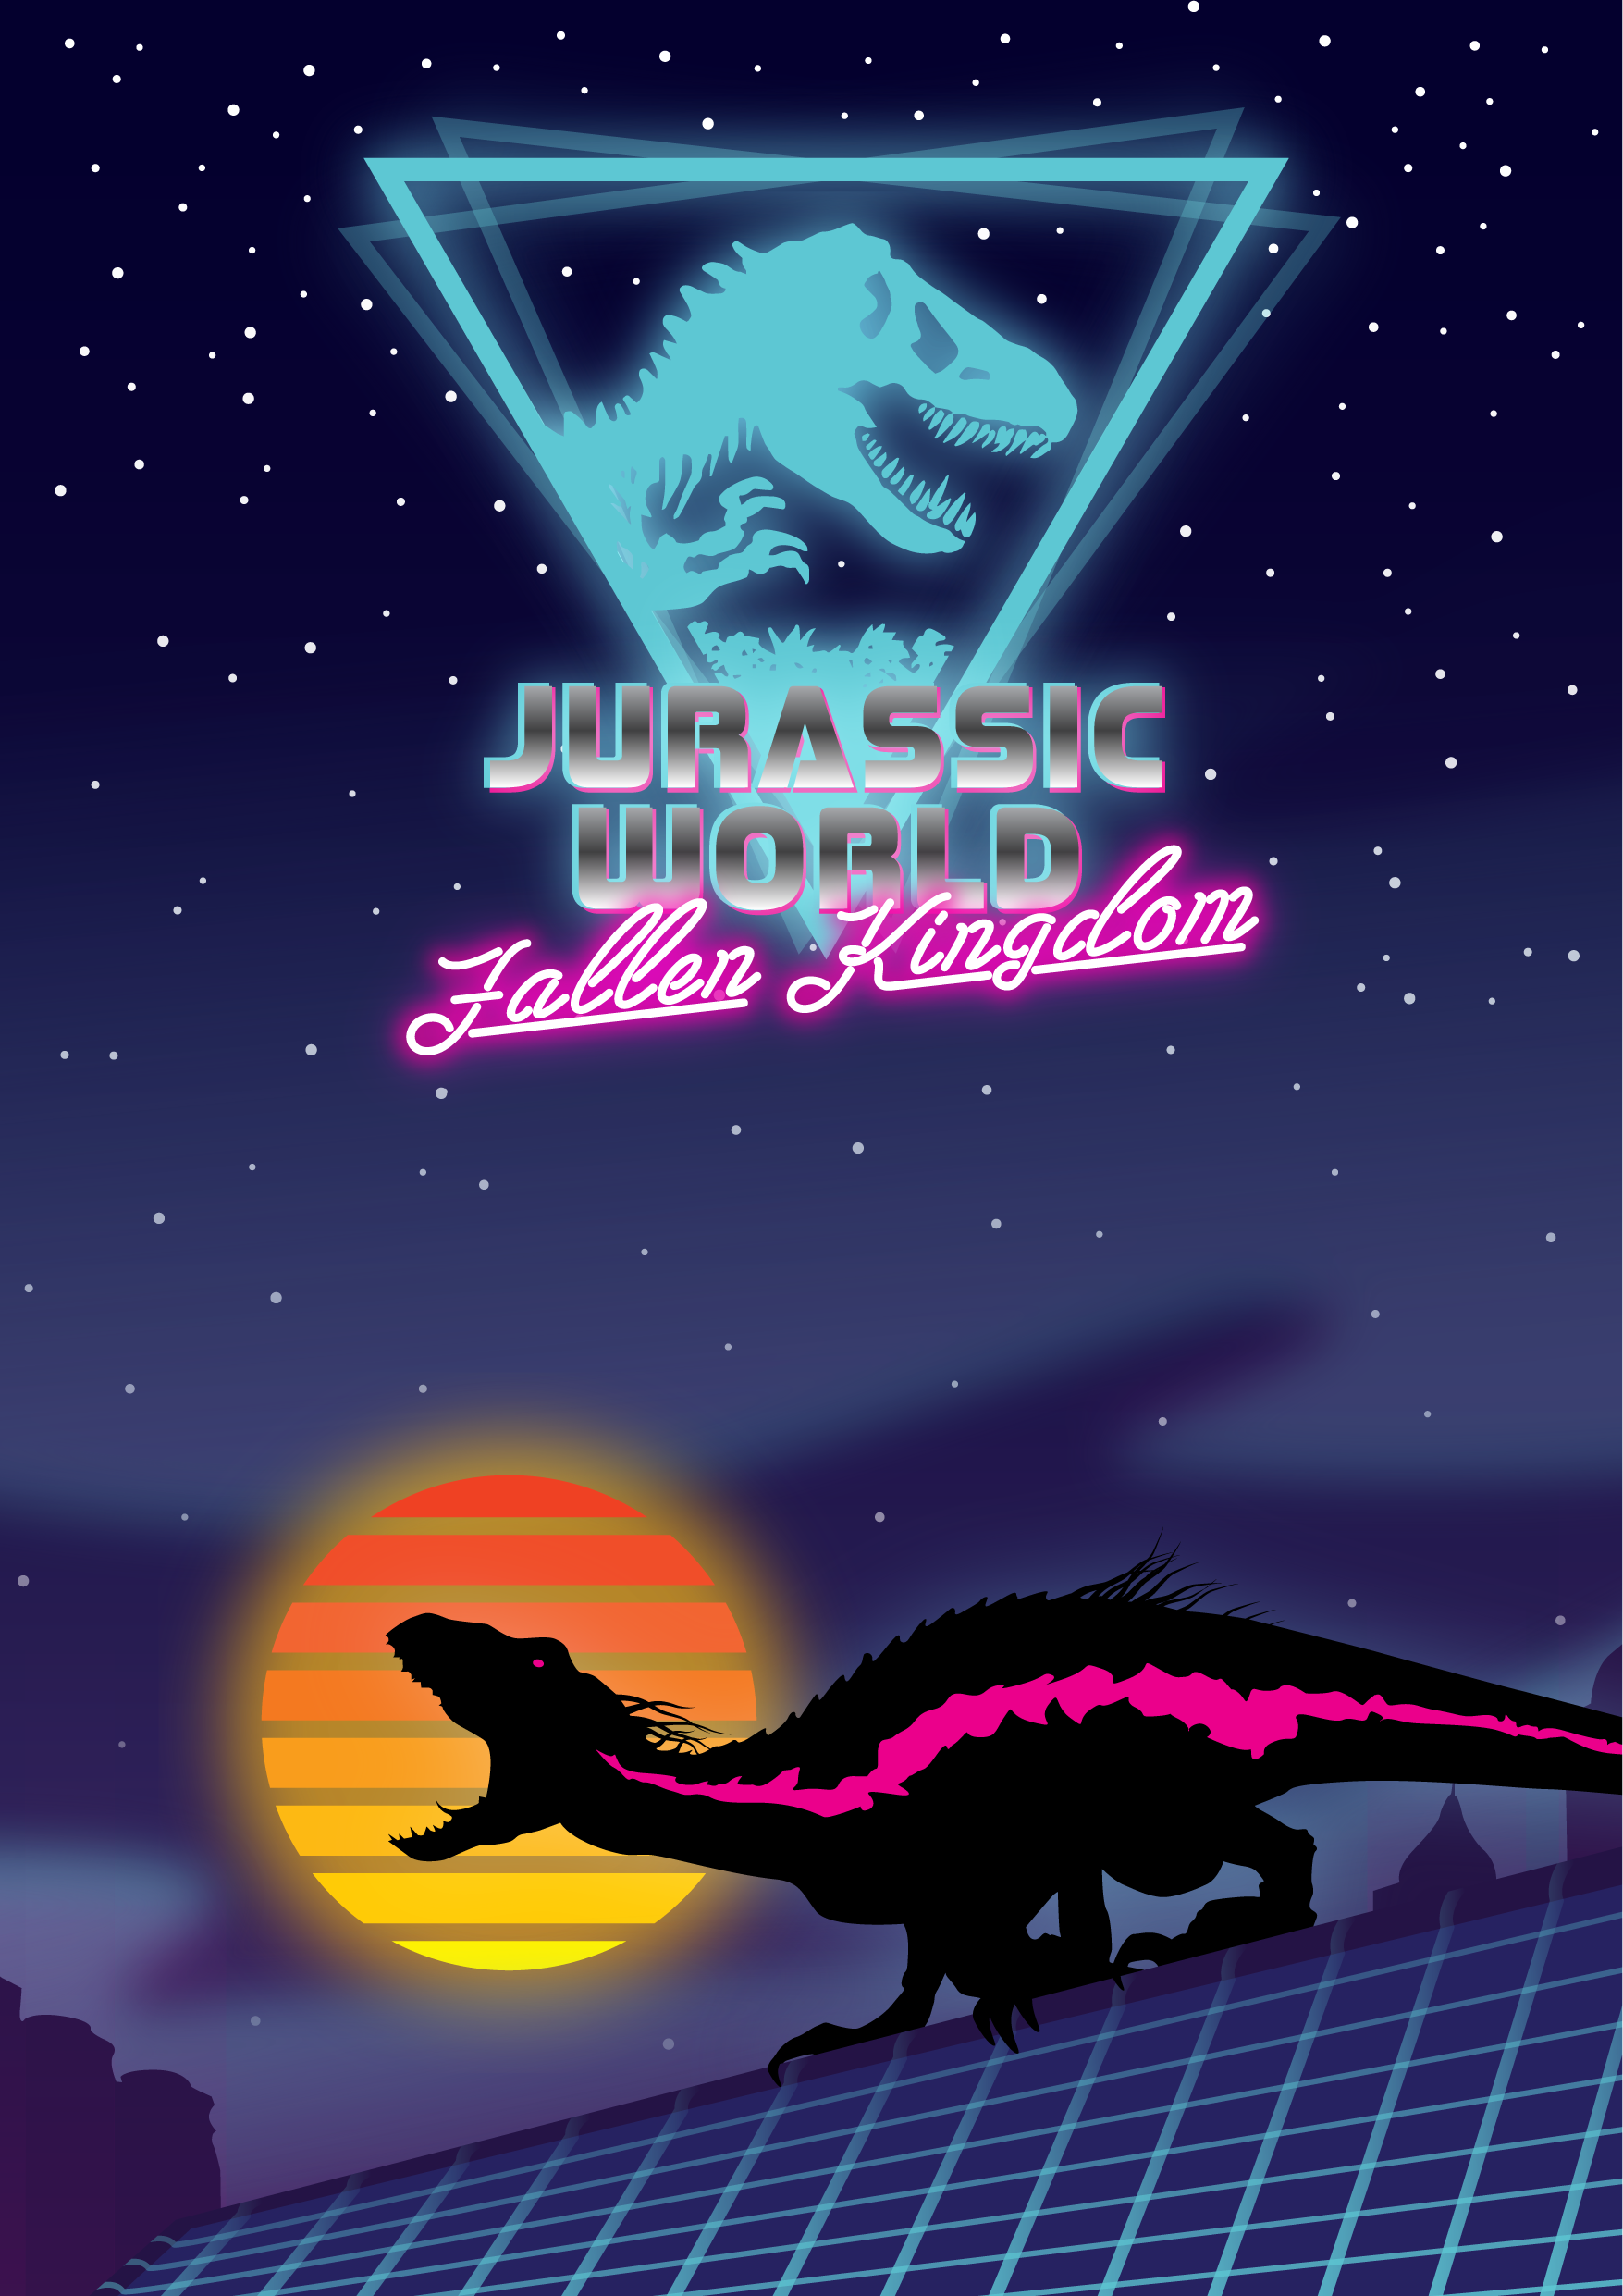 Made a neon 80s retro style poster for Jurassic World fallen kingdom using one of my favourite scenes from the movie